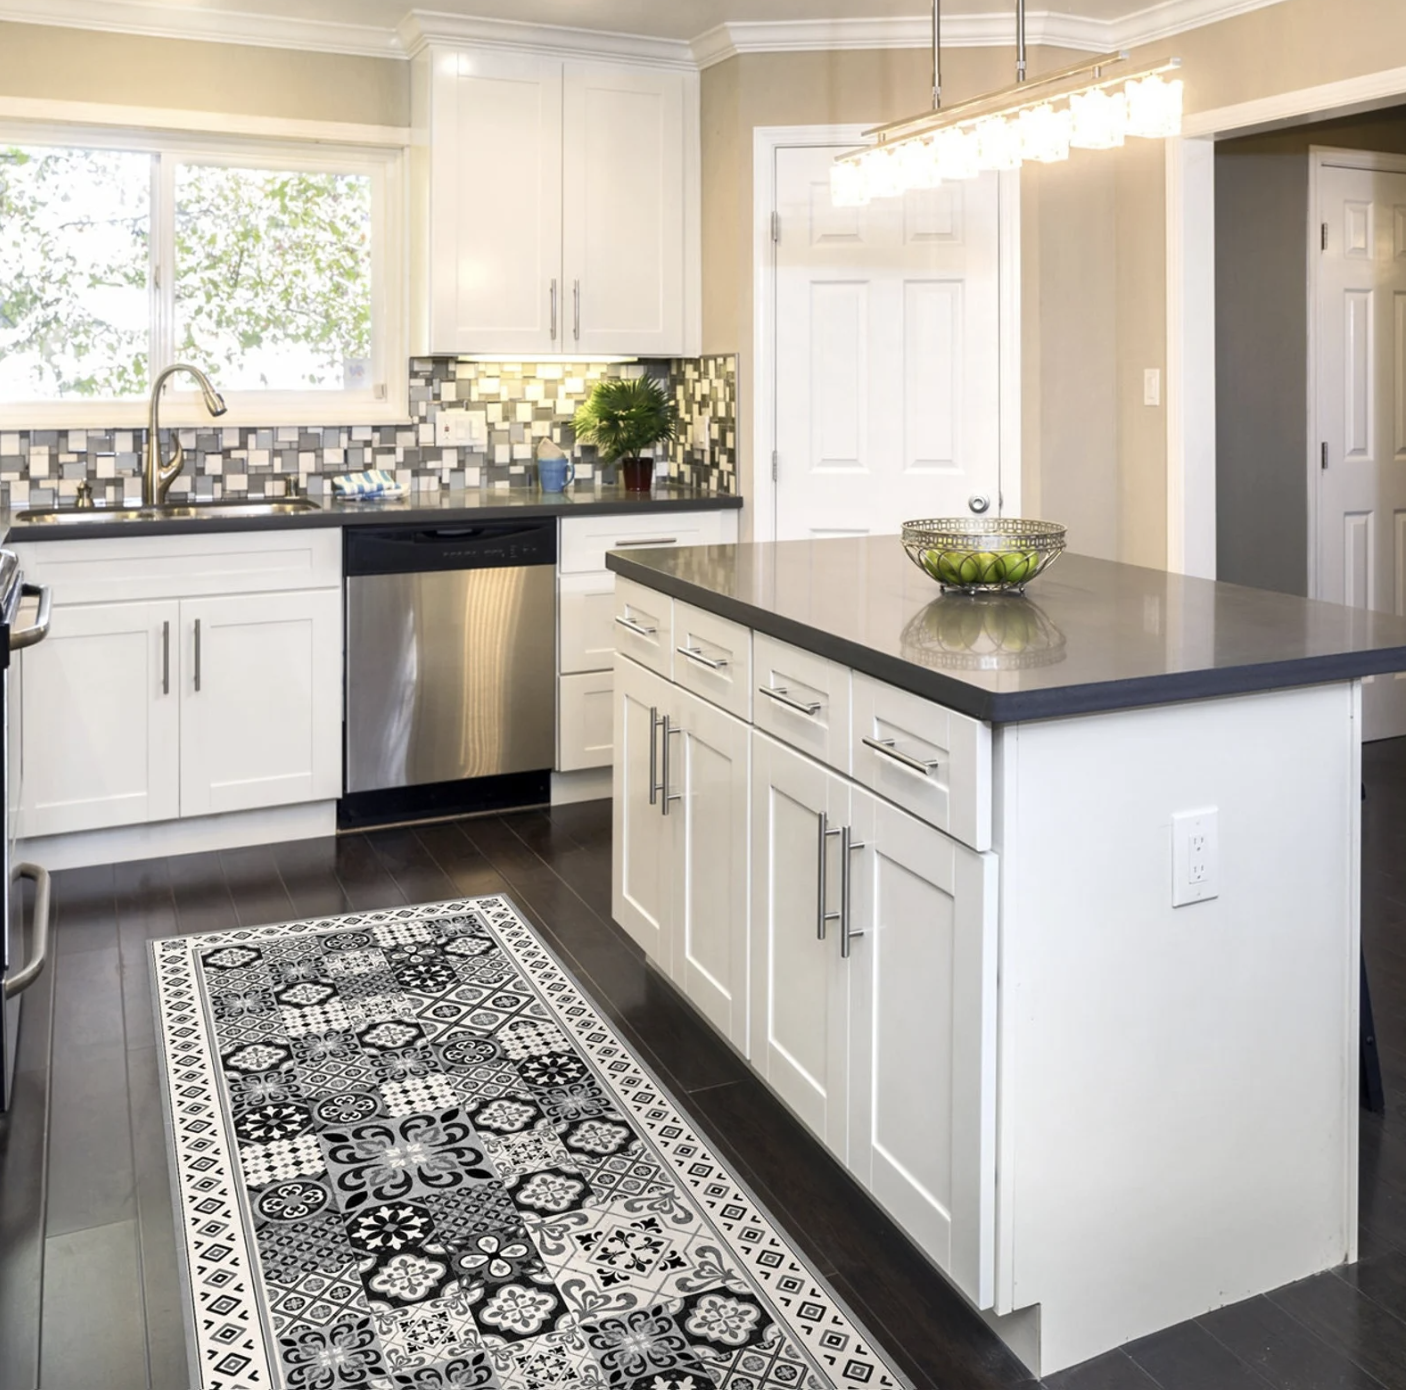 A gray vinyl mat with a printed tile design is shown on the floor of a kitchen